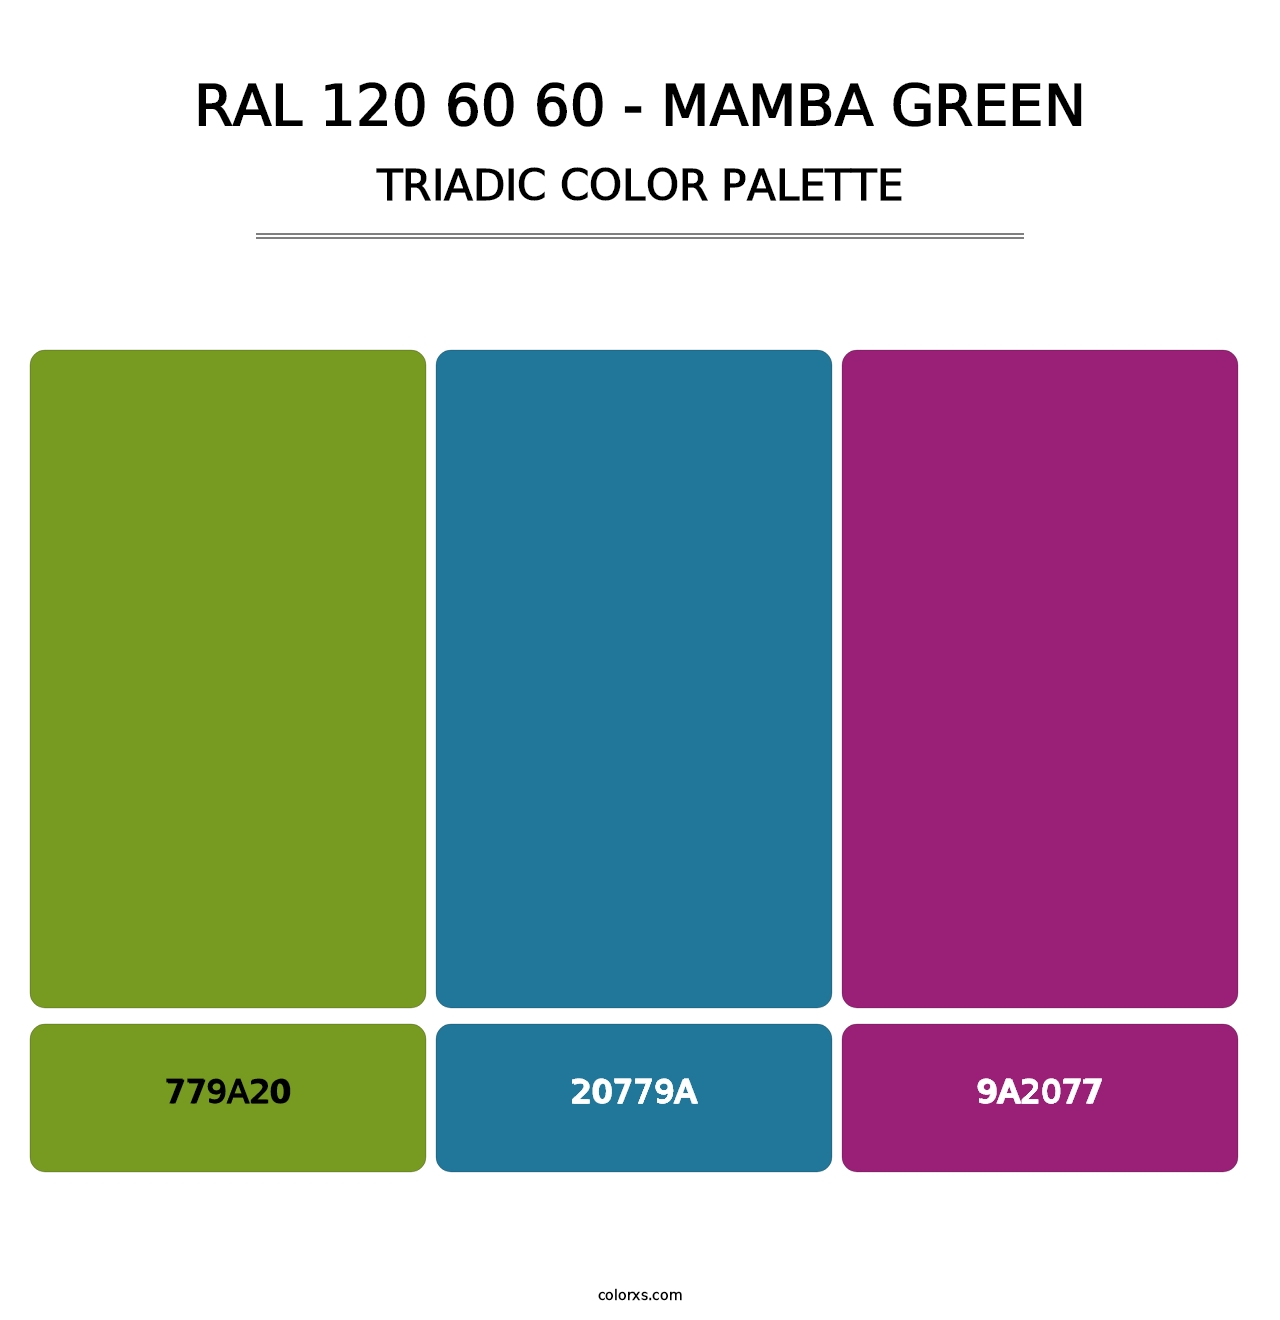 RAL 120 60 60 - Mamba Green - Triadic Color Palette